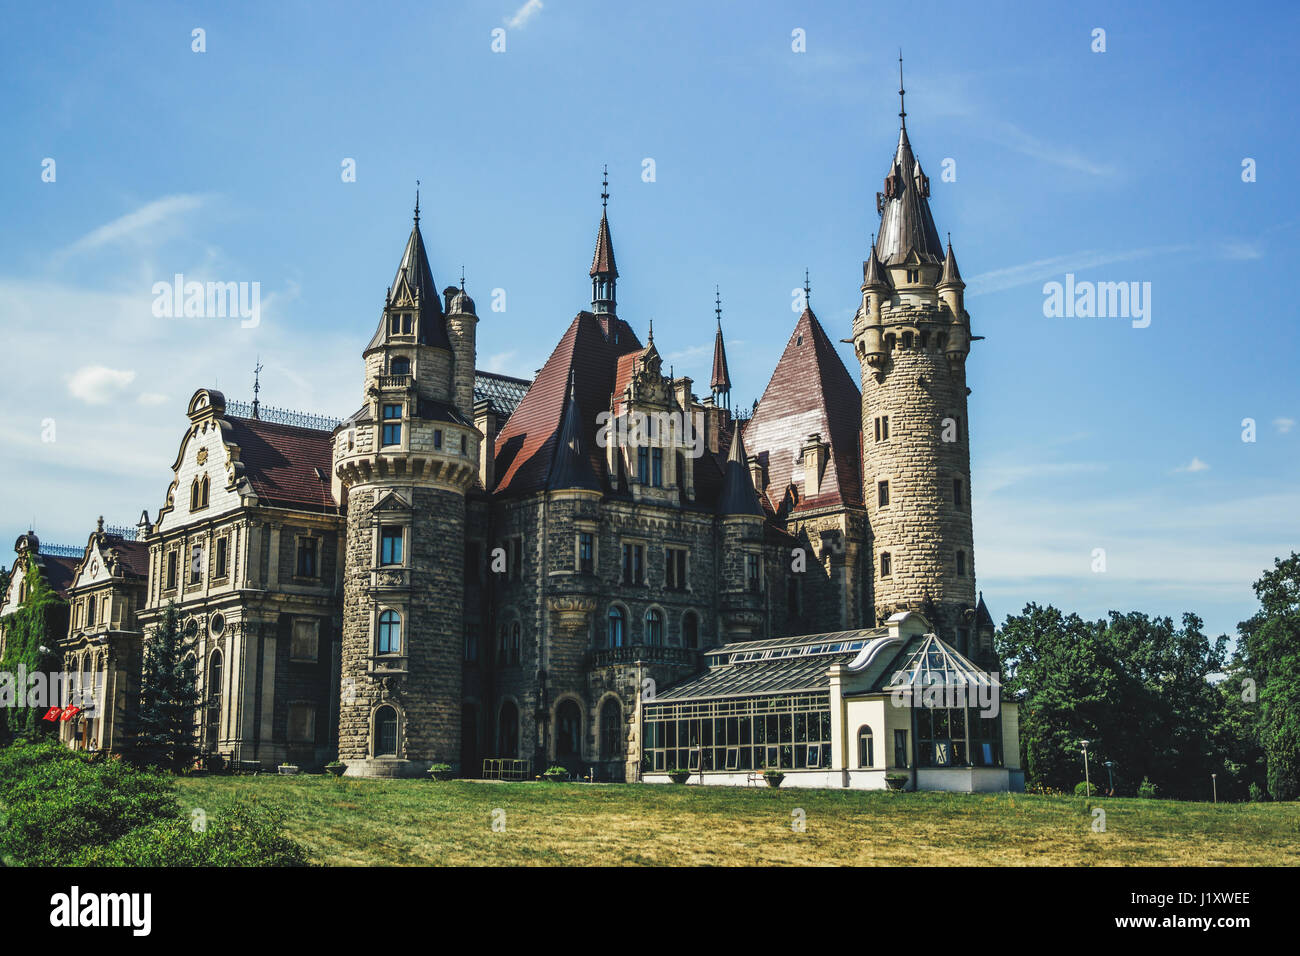 Moszna castle in Poland during the summer, side view of the palace with many towers. Stock Photo